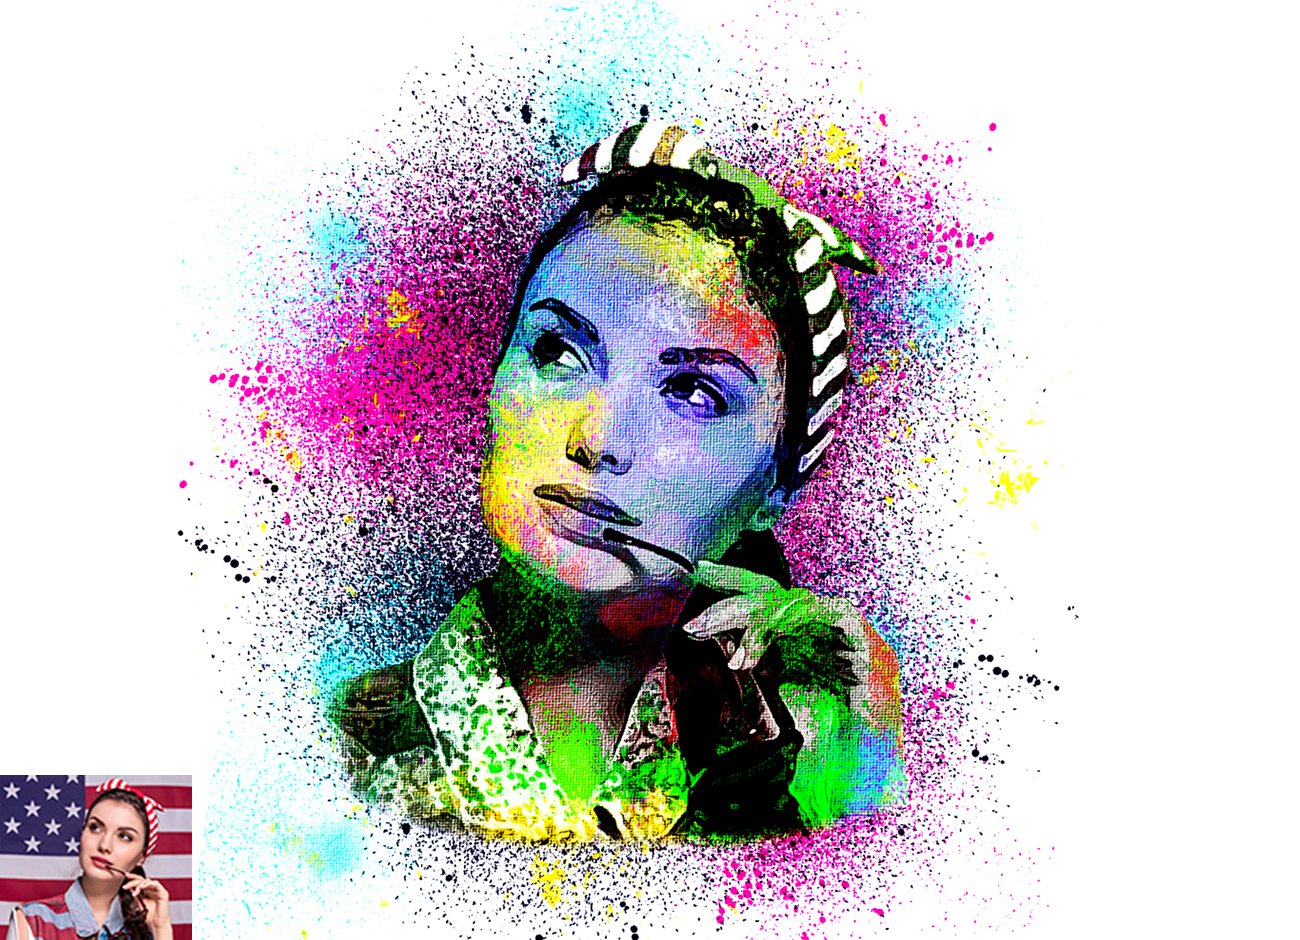 Face Painting Art Photoshop Actionpreview image.